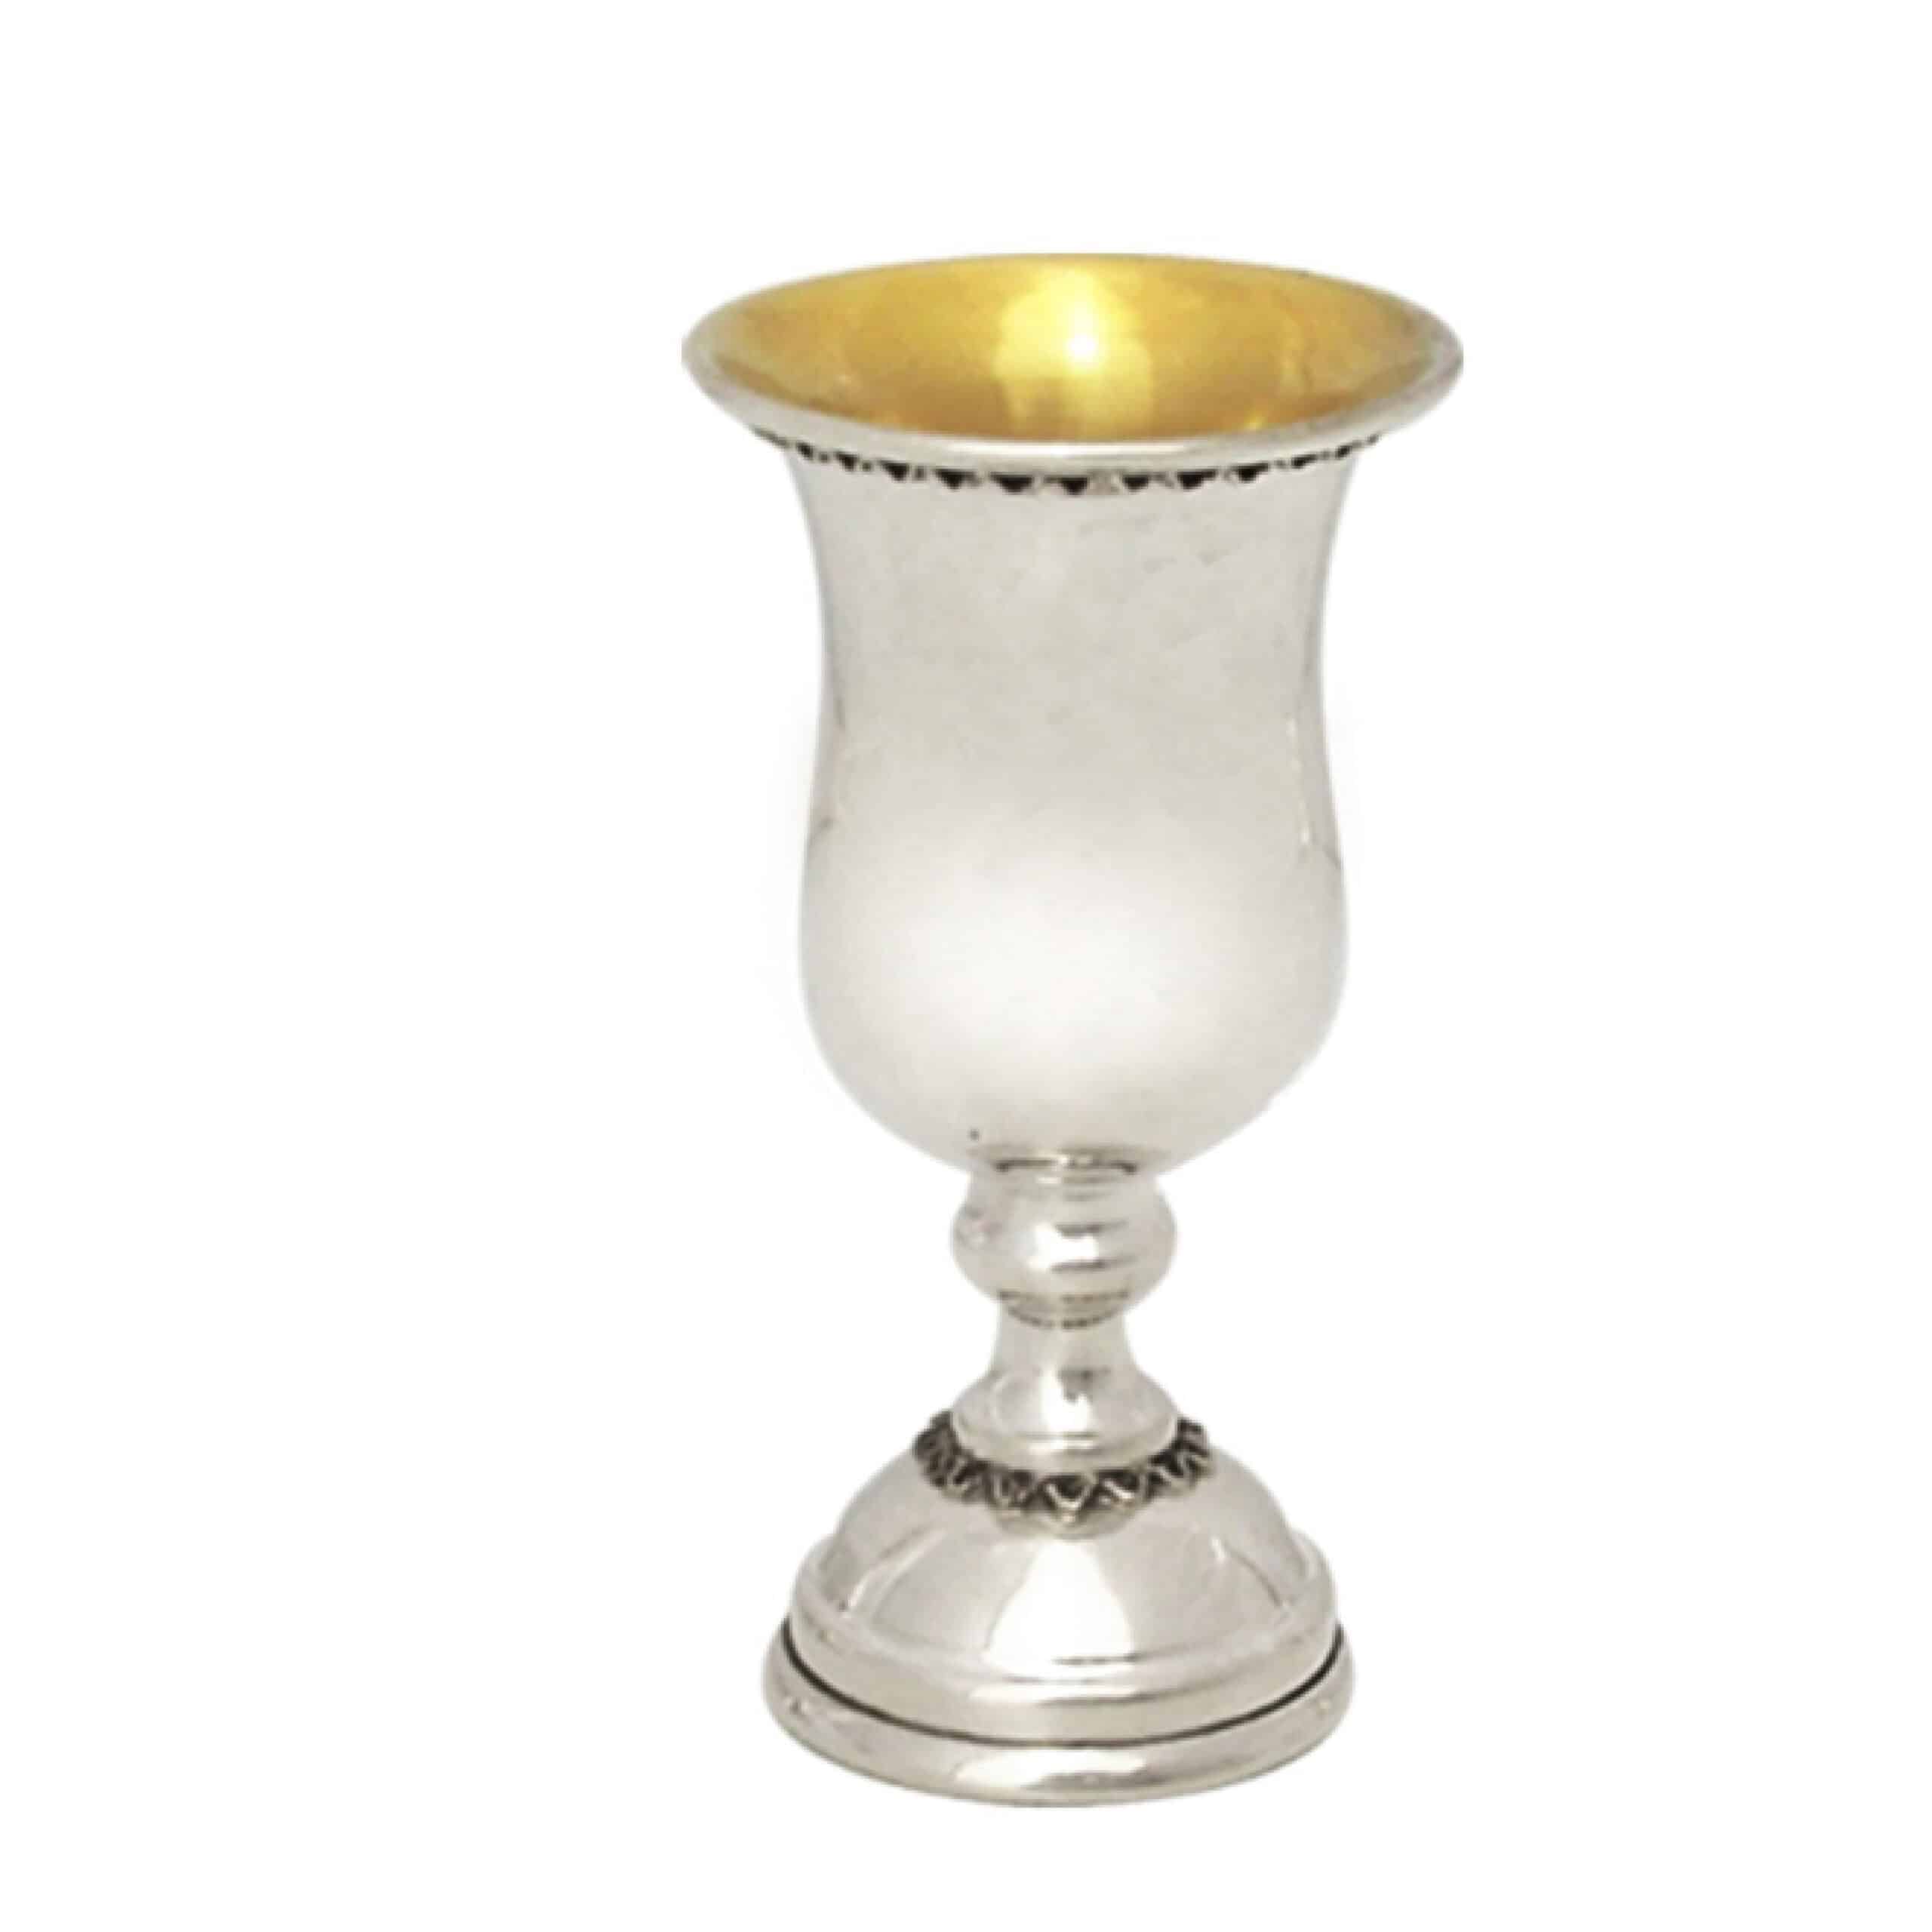 925 Sterling Silver Small Kiddush Cup With Traditional Filigree Rim